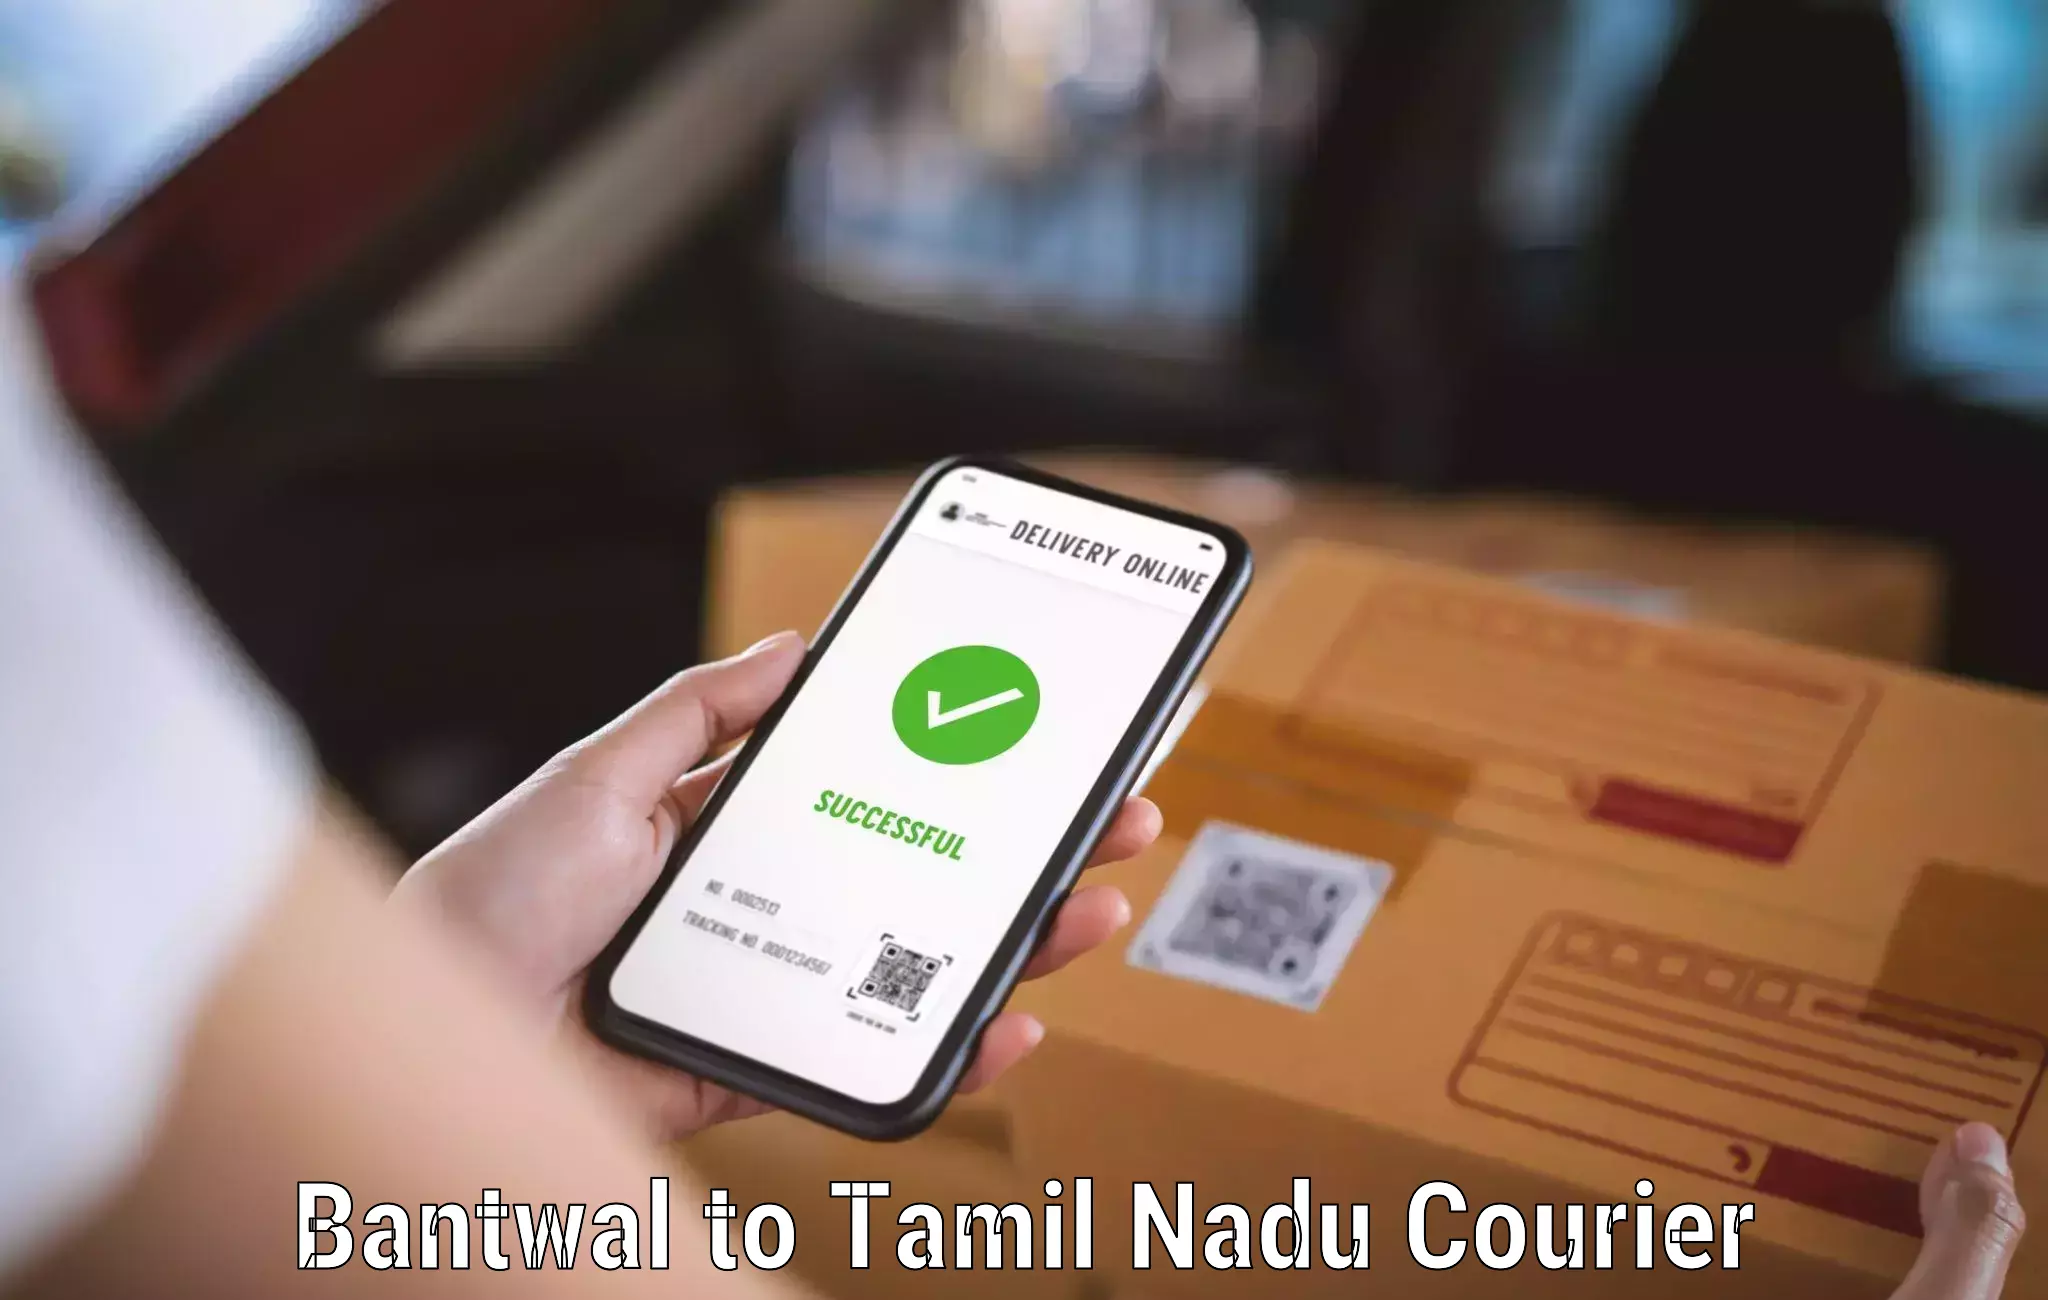 Courier service comparison Bantwal to Tallakulam